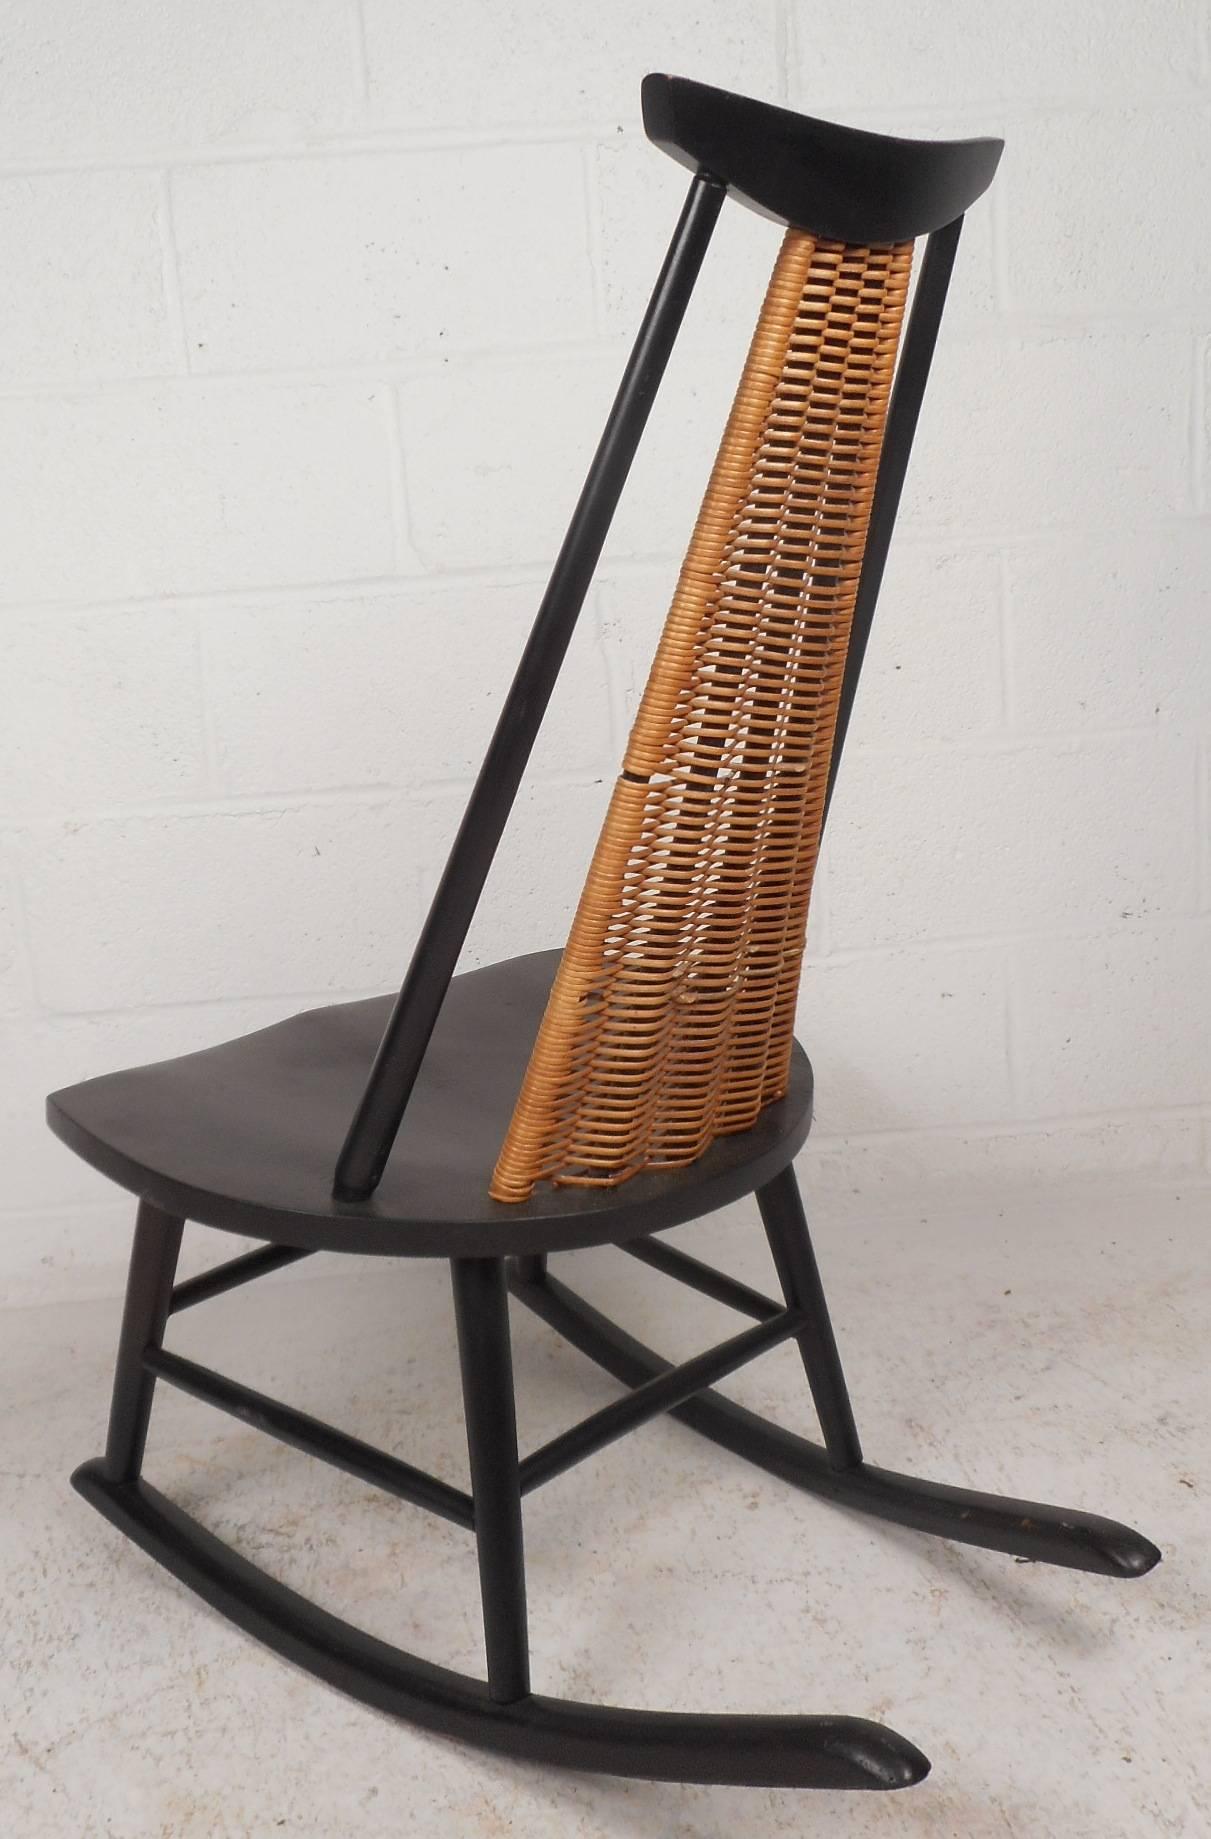 Late 20th Century Mid-Century Modern Danish Rocking Chair with a Woven Back Rest